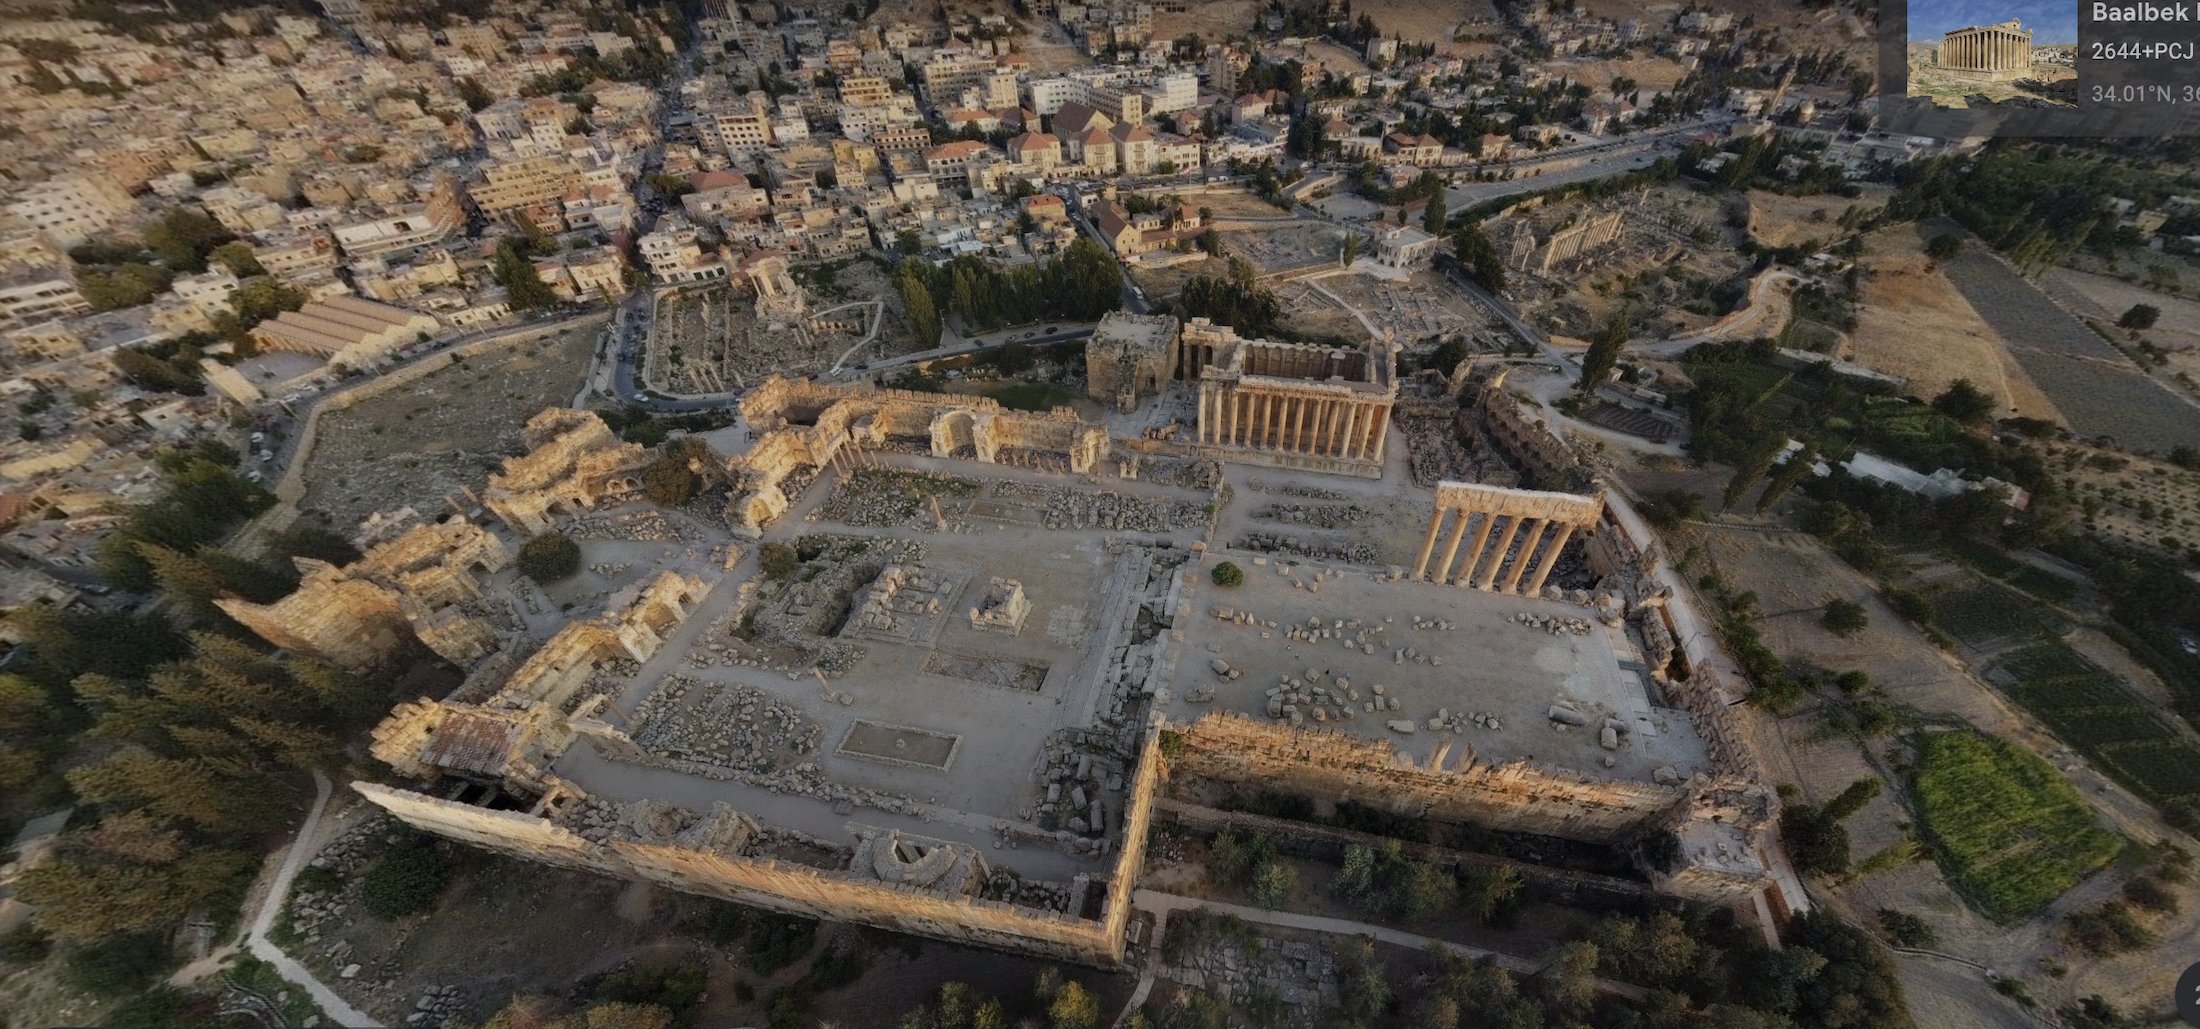 Baalbek is one of the oldest sites on earth.